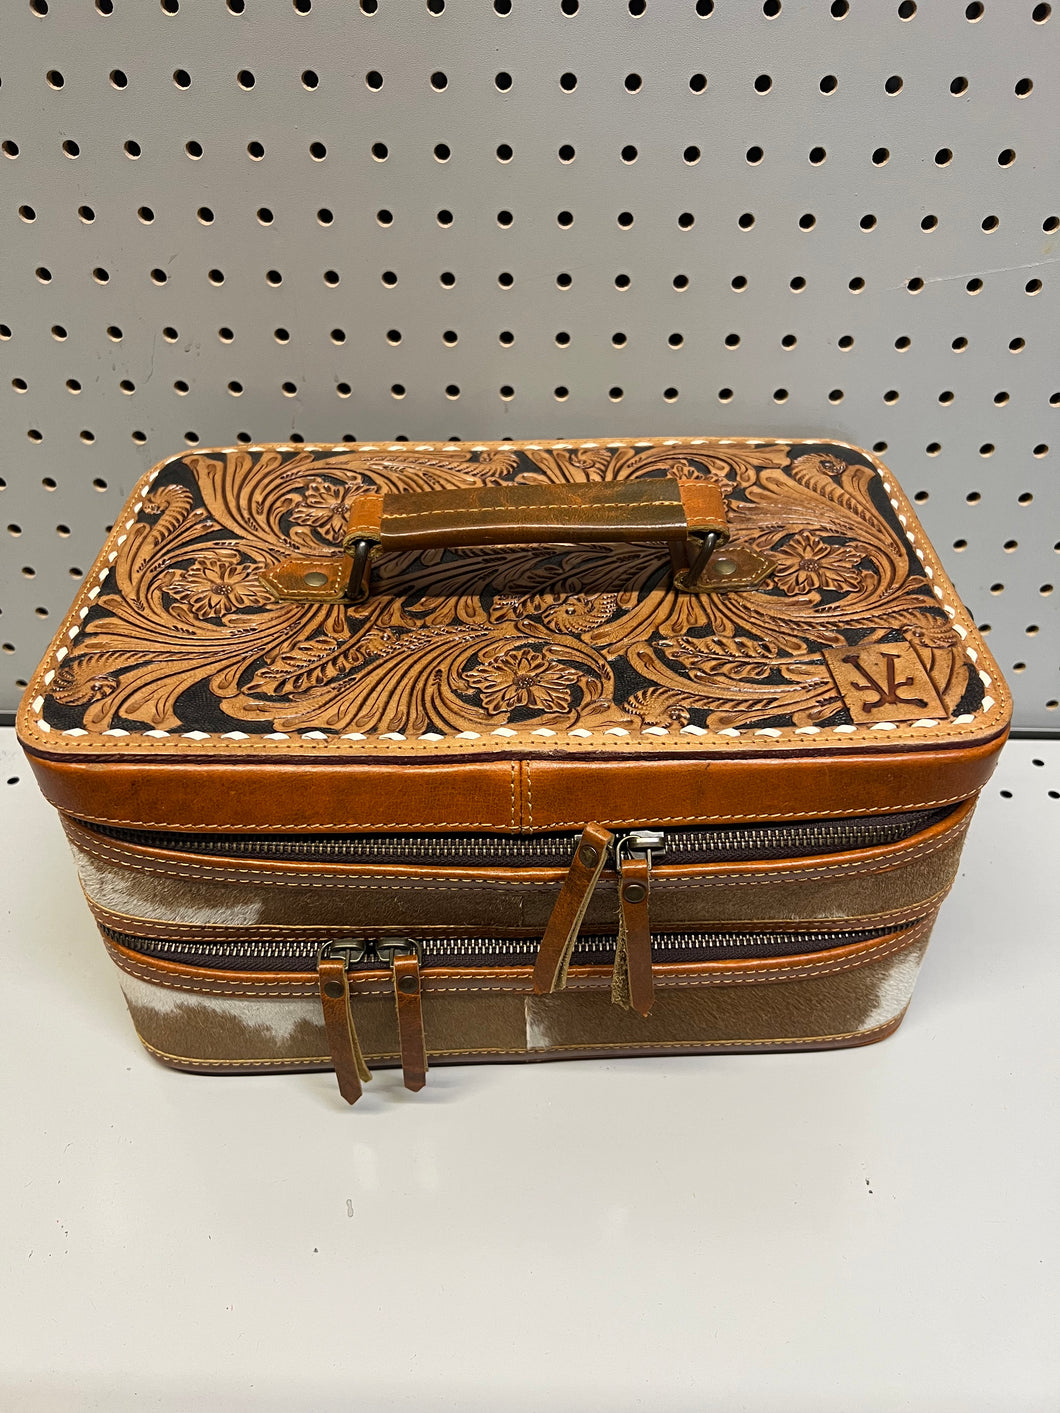 Triple Decker Jewelry Case (brown) 2 removable squash blossom trays